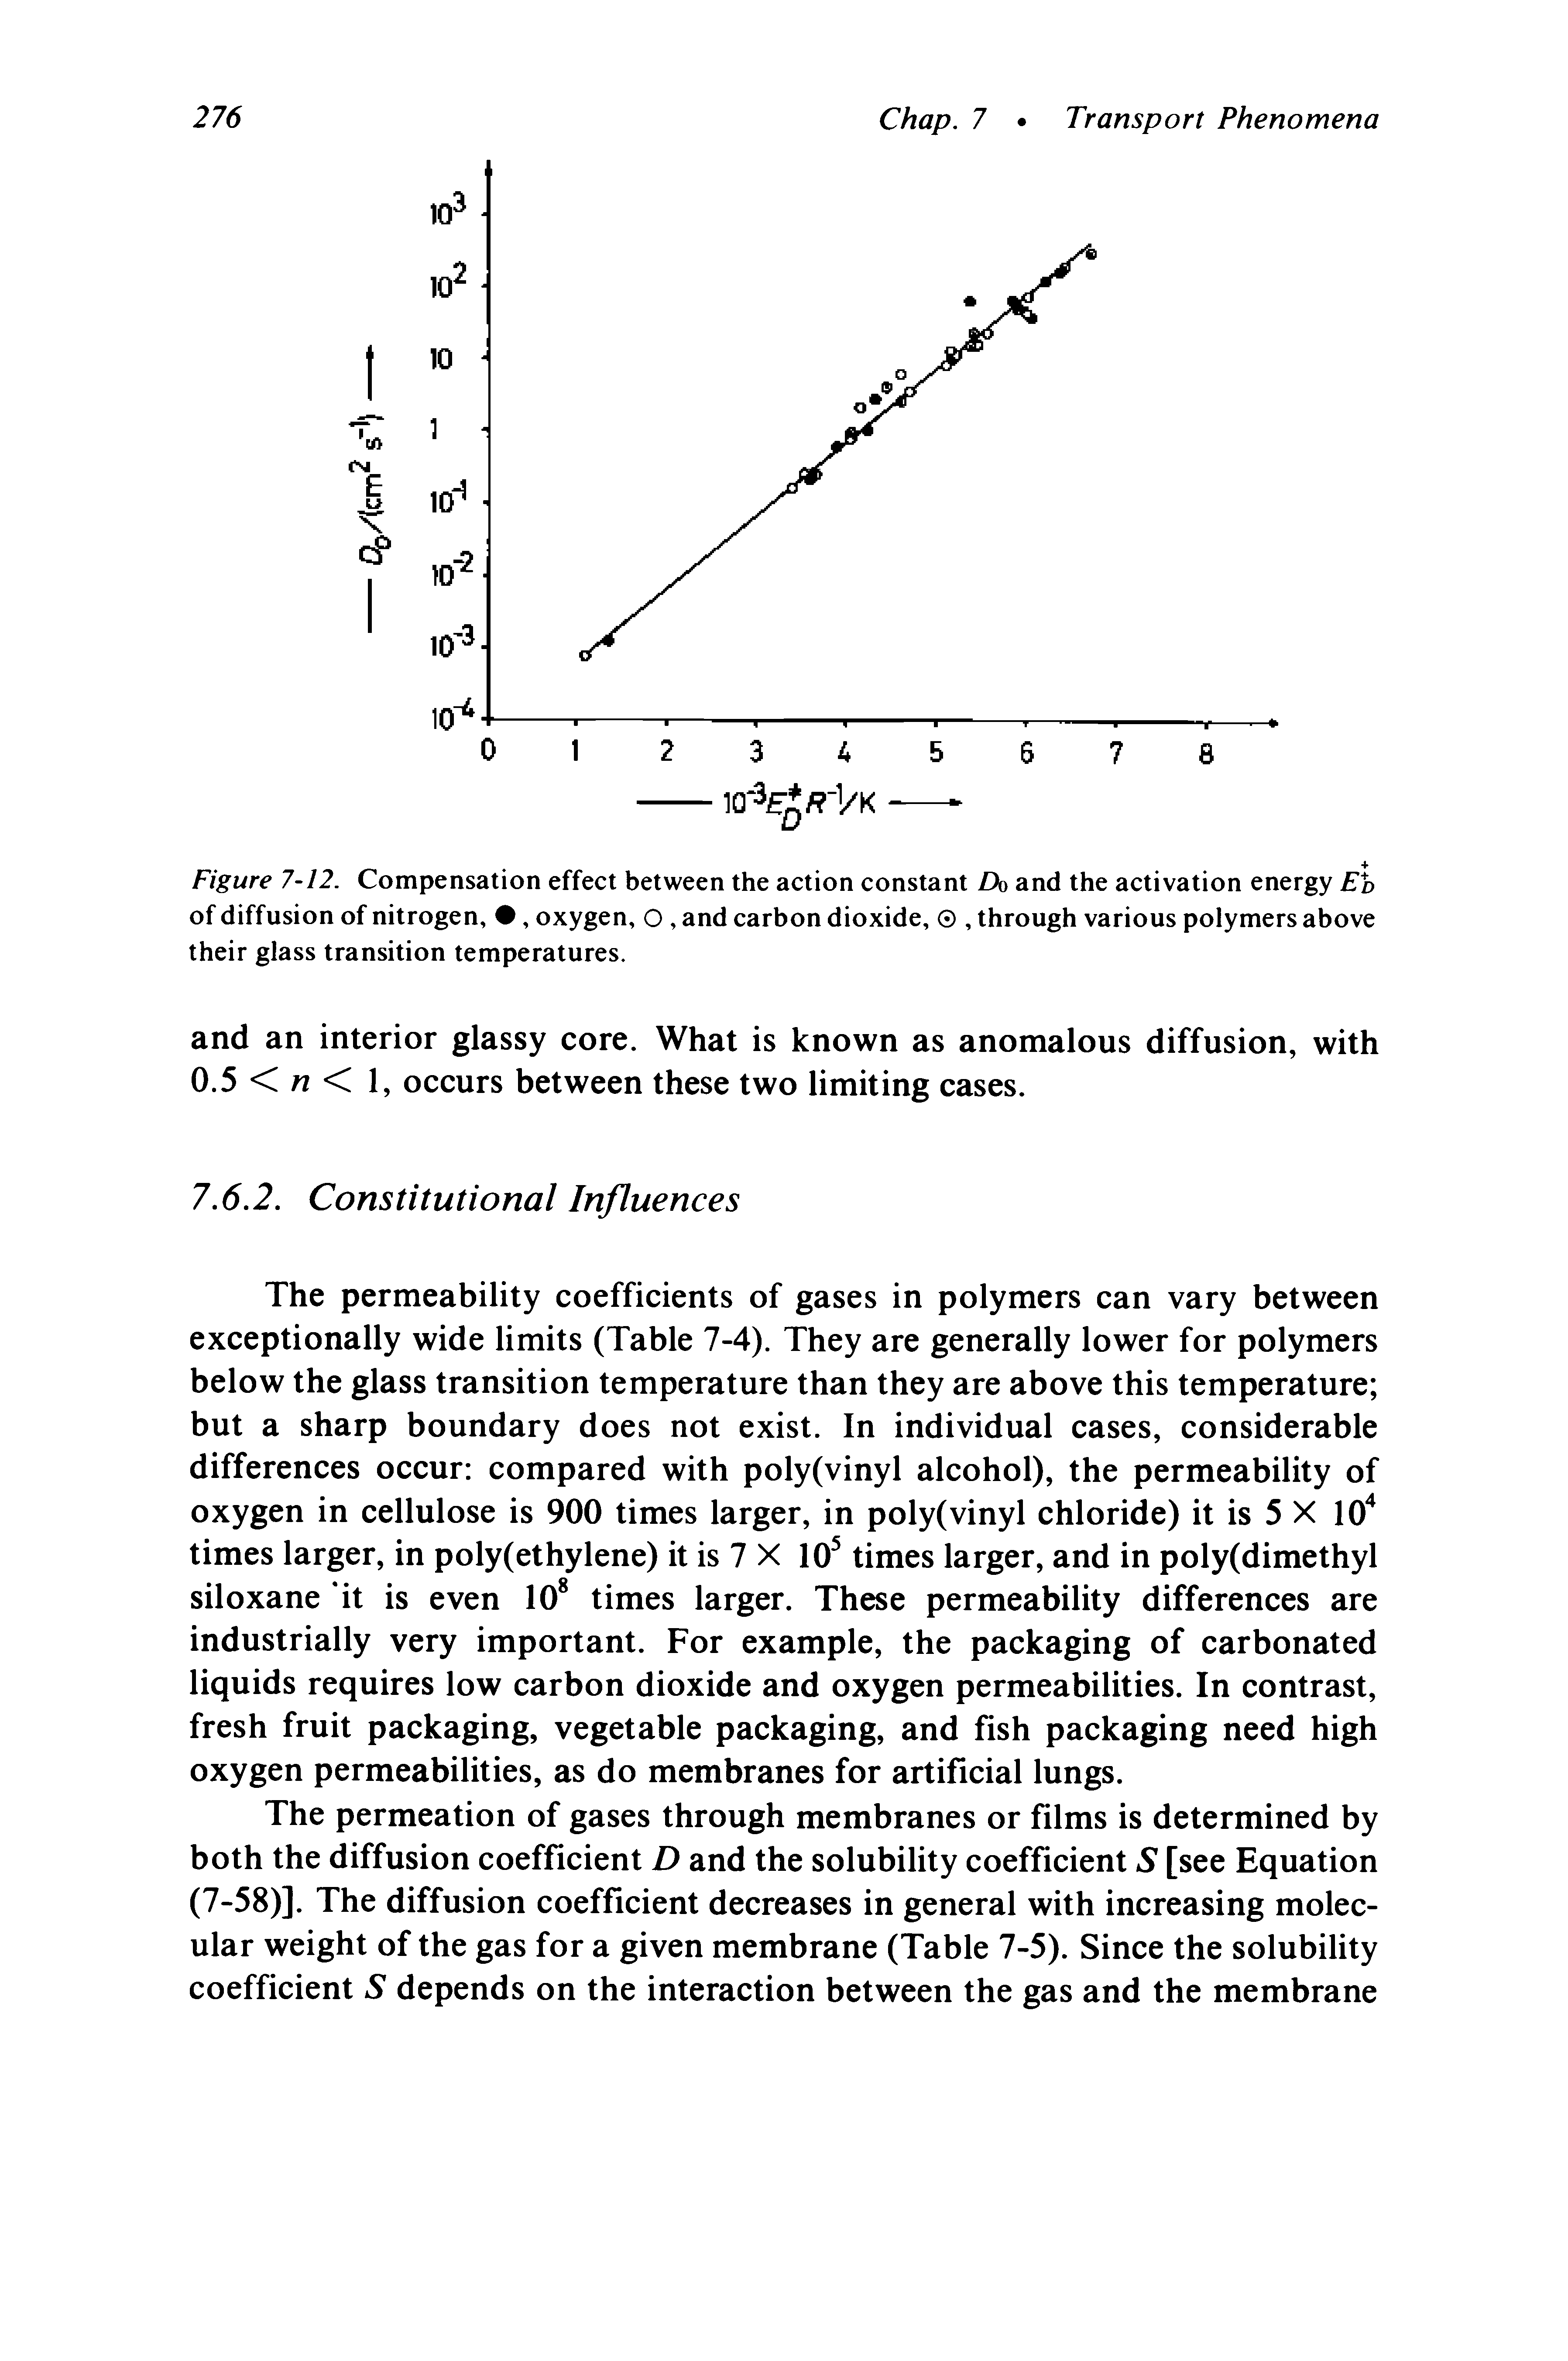 Figure 7-12. Compensation effect between the action constant A) and the activation energy i) of diffusion of nitrogen, , oxygen, O, and carbon dioxide, , through various polymers above their glass transition temperatures.